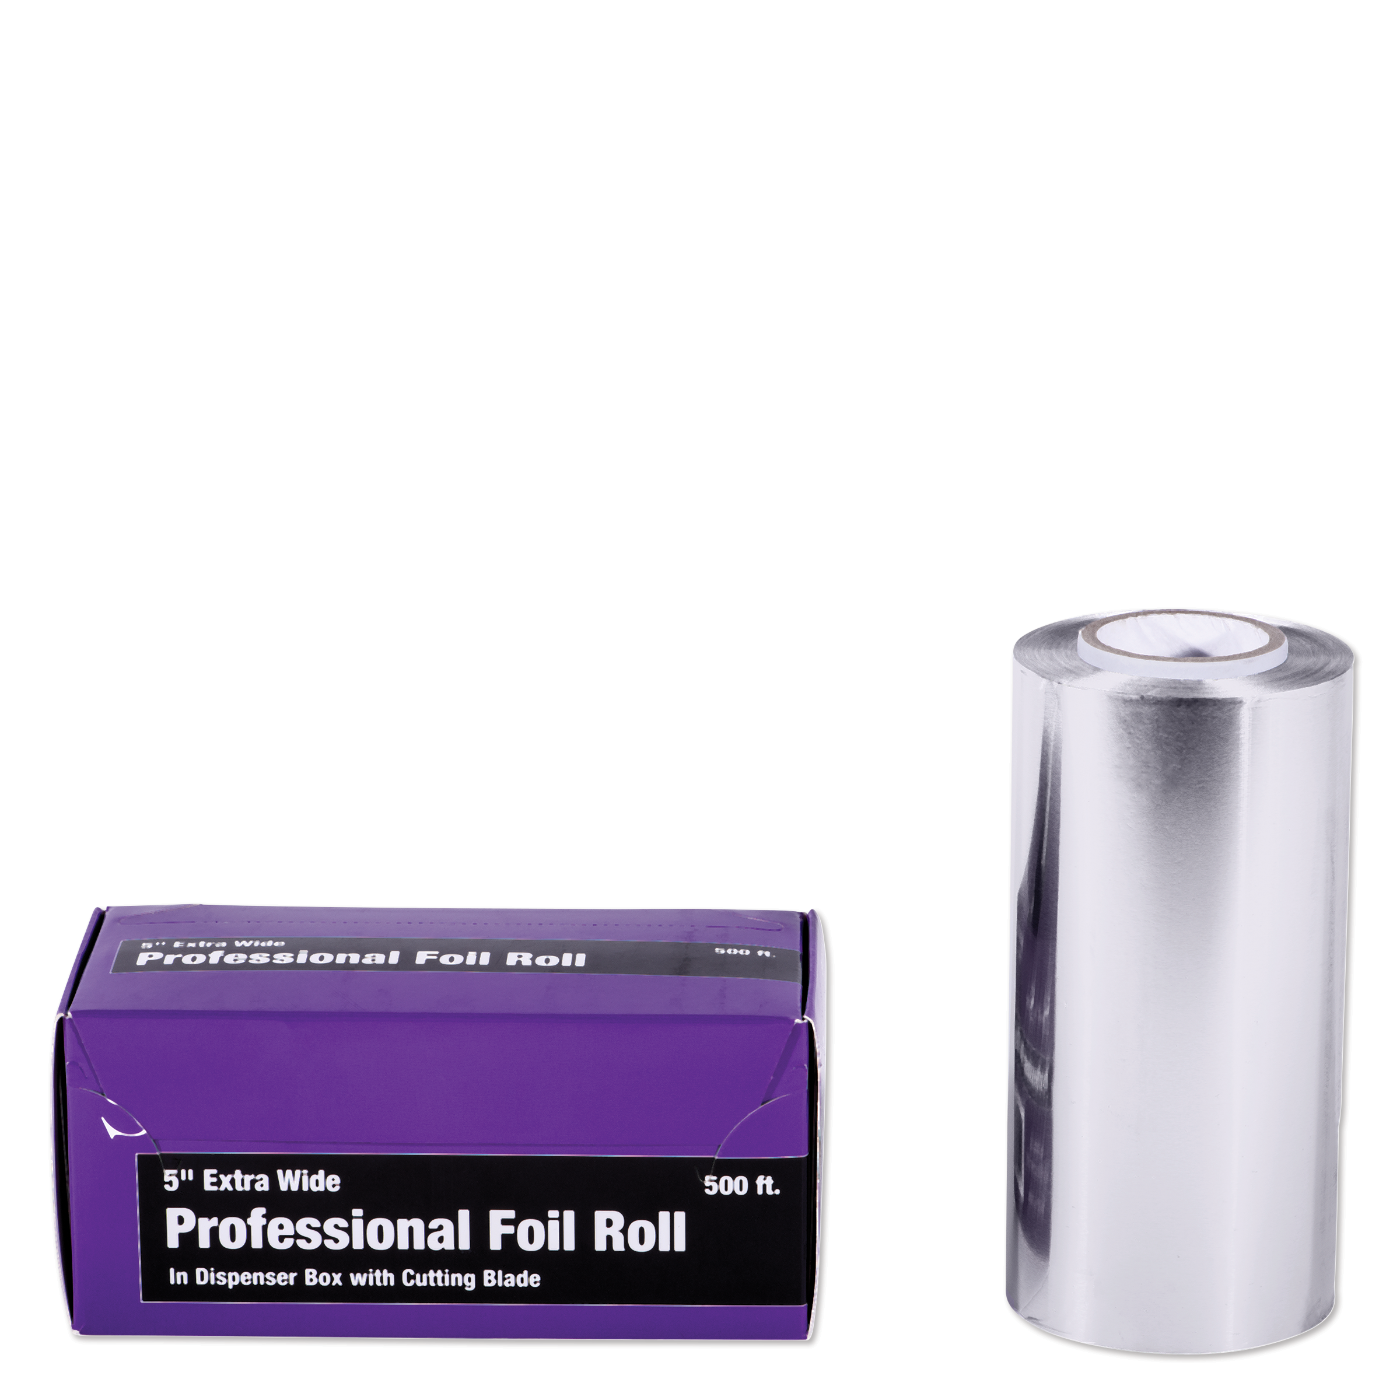 Soft N Style Professional Foil Roll 500ft- 5 inch